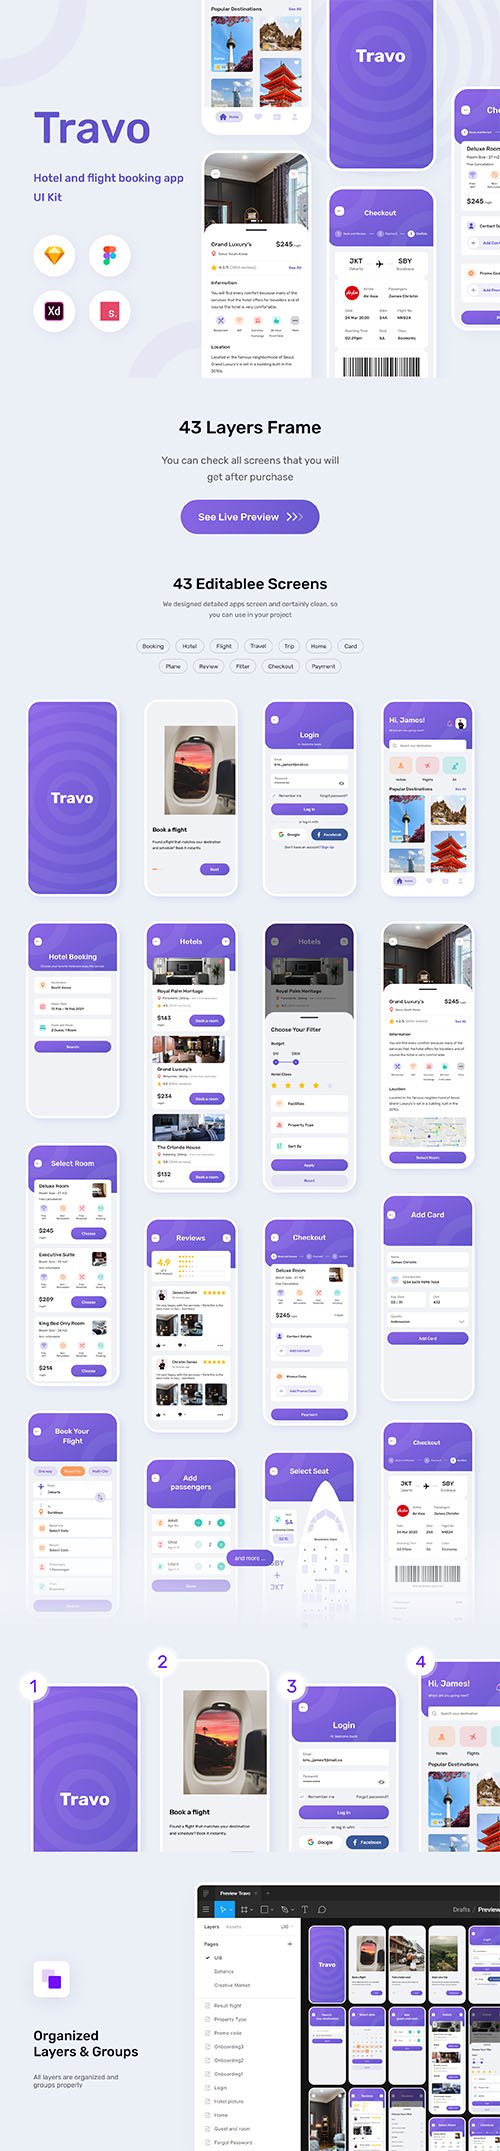 Travo Apps - UI KIT for Travel Flight and Hotel